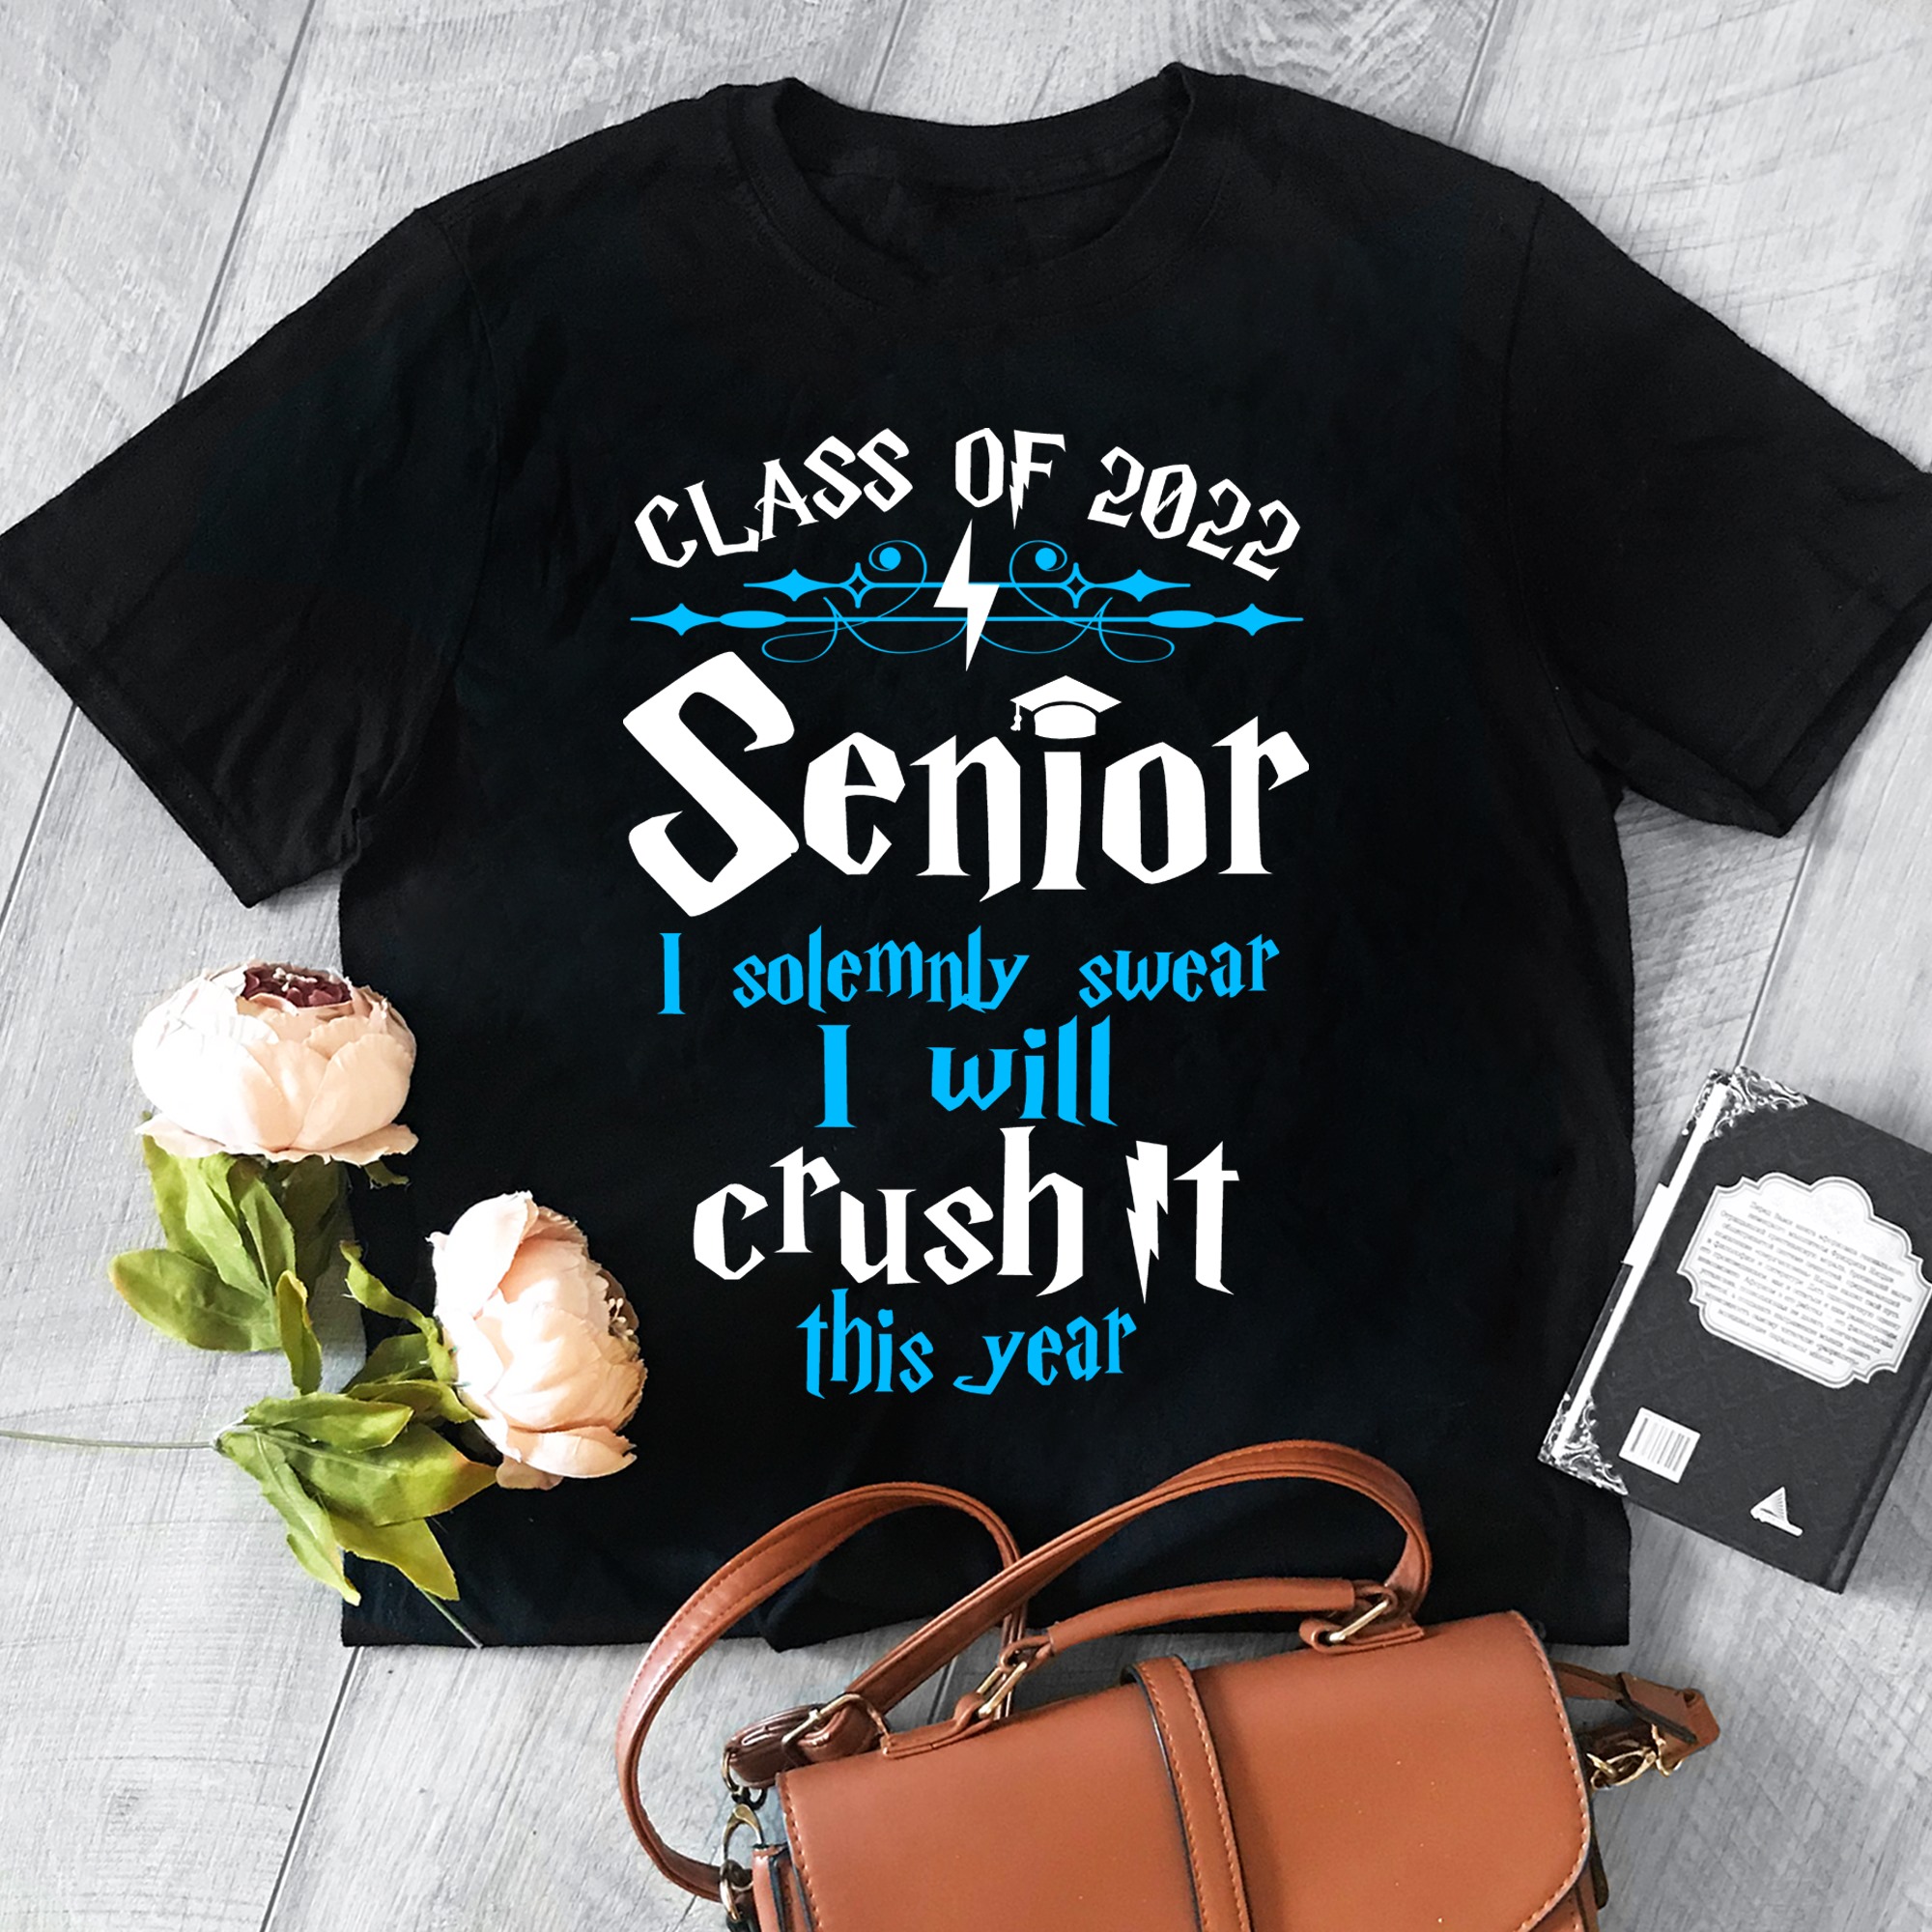 Class of 2022 Senior I solemnly swear I will crush it this year